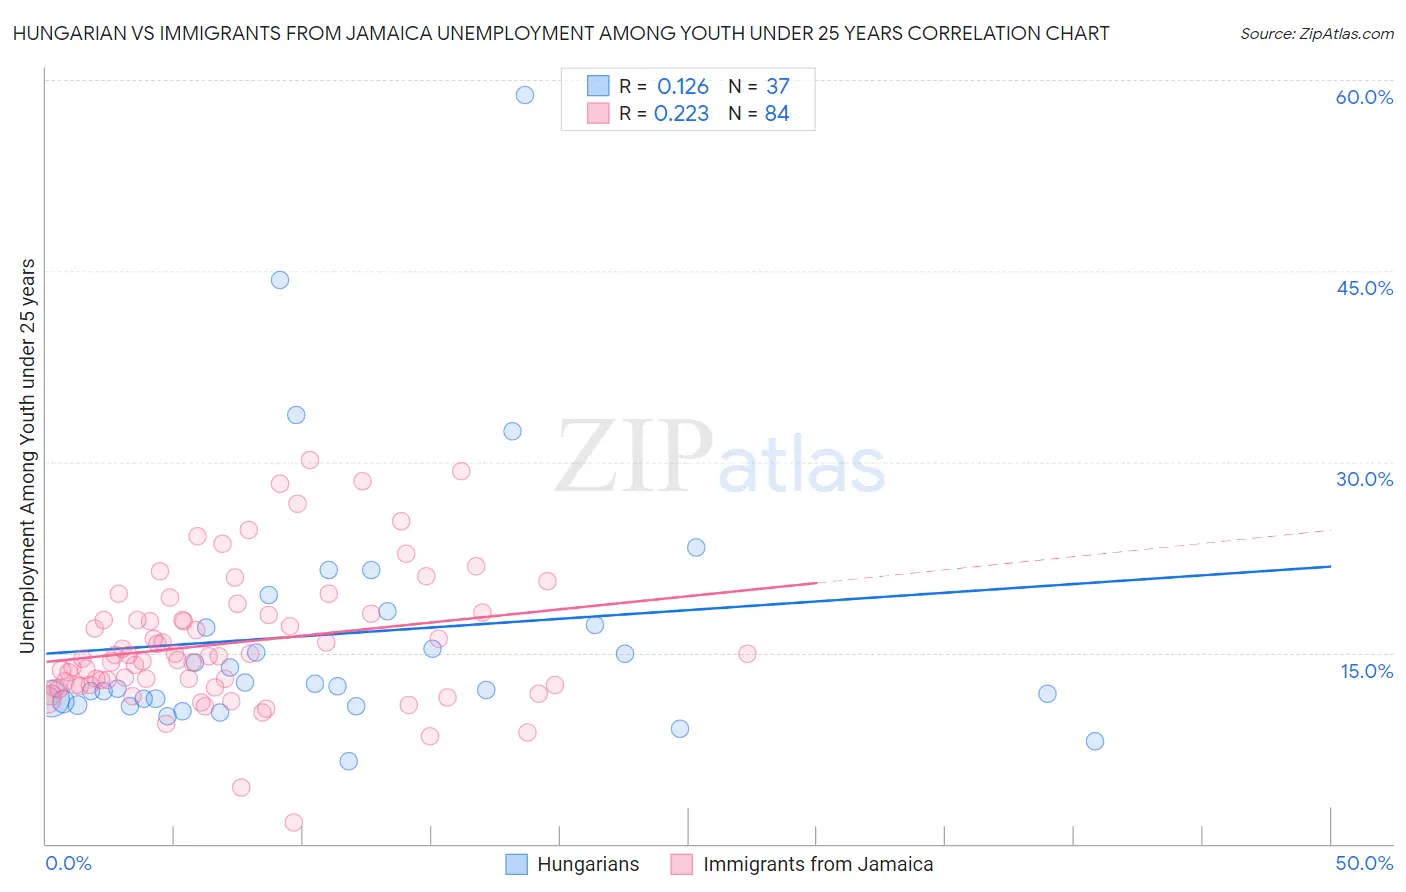 Hungarian vs Immigrants from Jamaica Unemployment Among Youth under 25 years